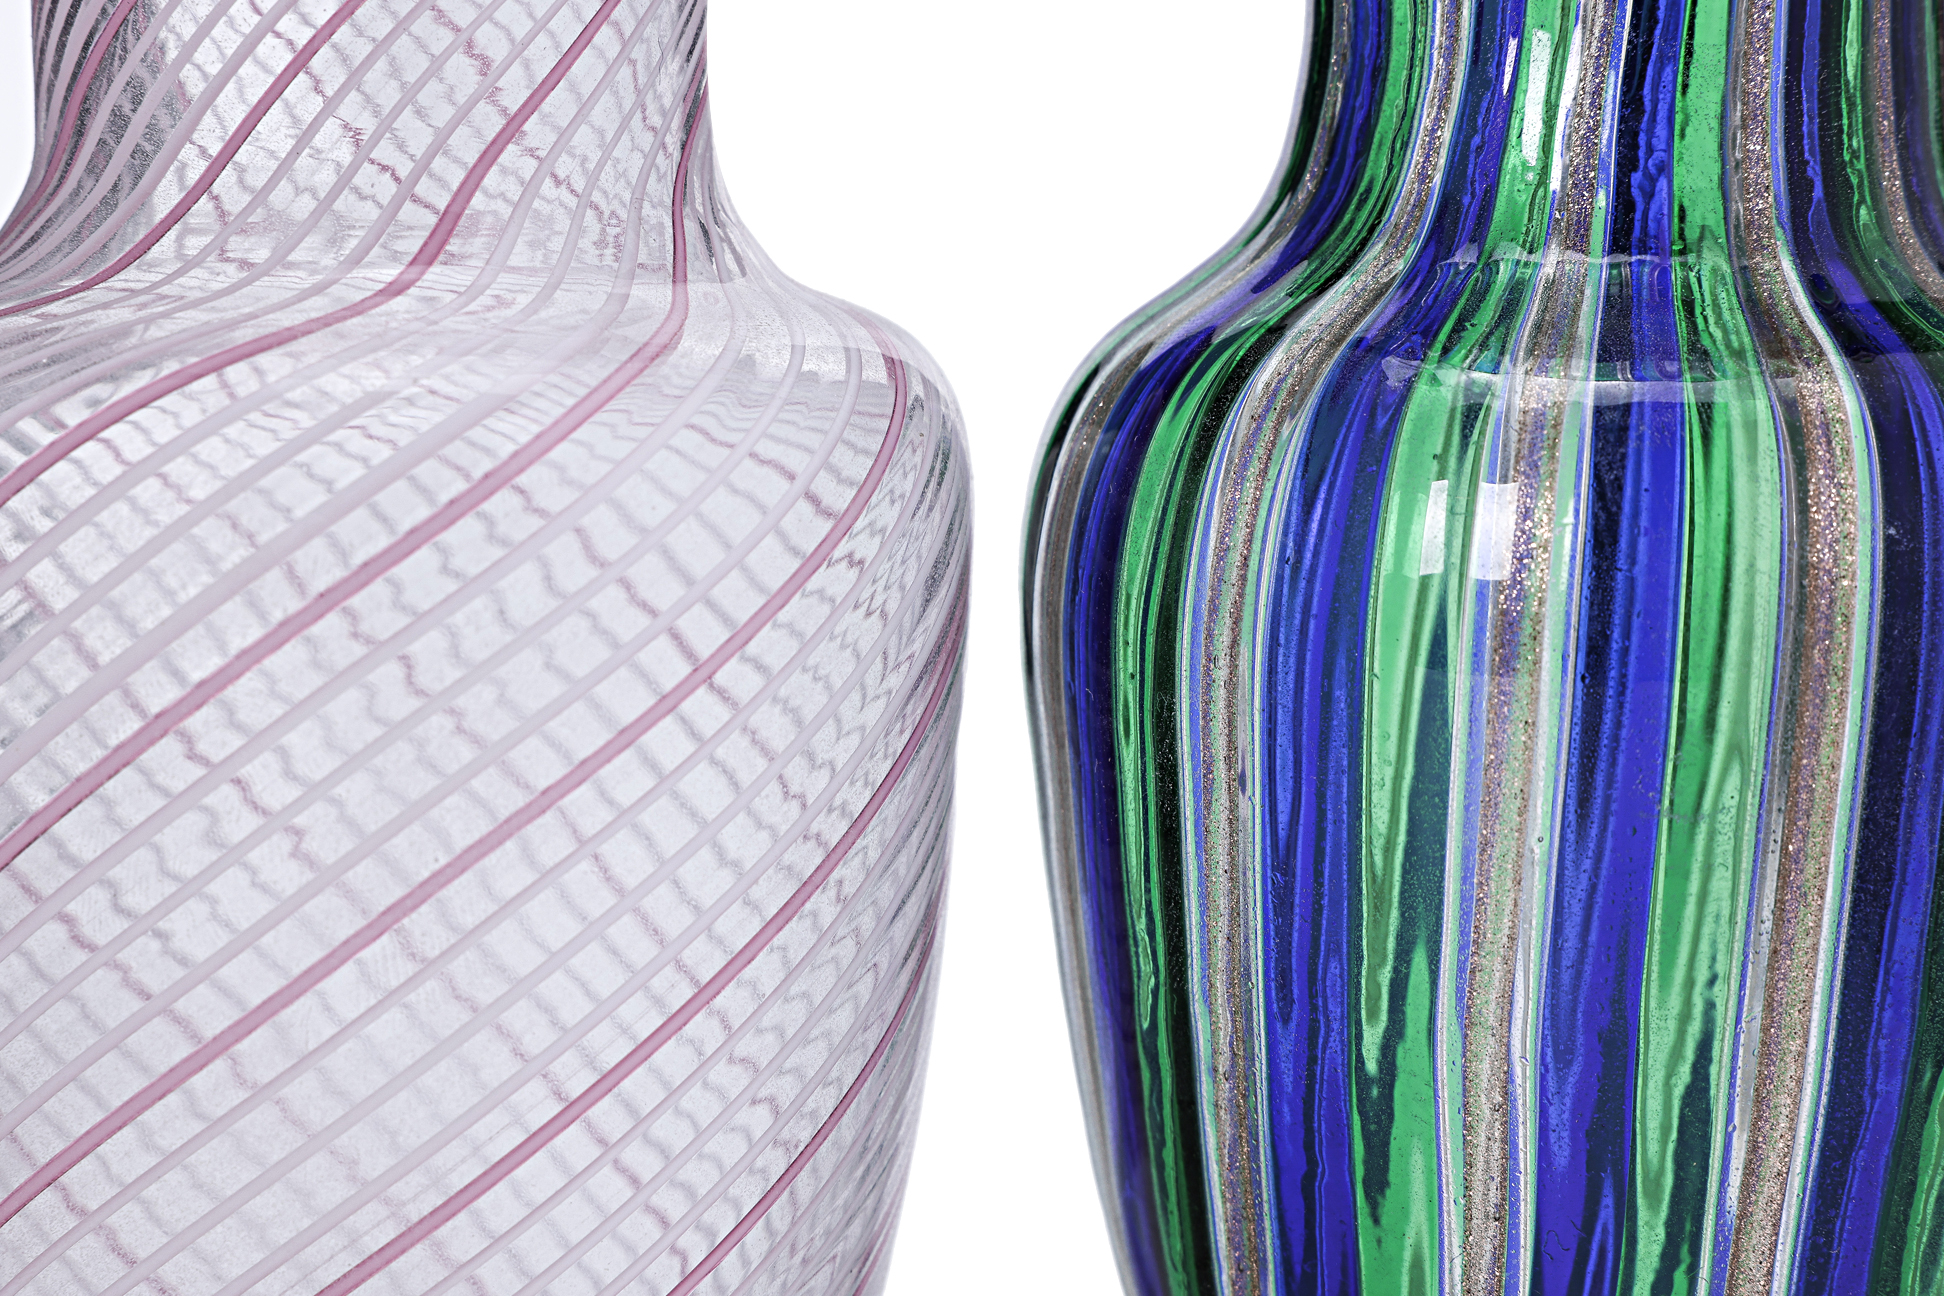 TWO MURANO GLASS CANE VASES IN THE MANNER OF VENINI - Image 2 of 3